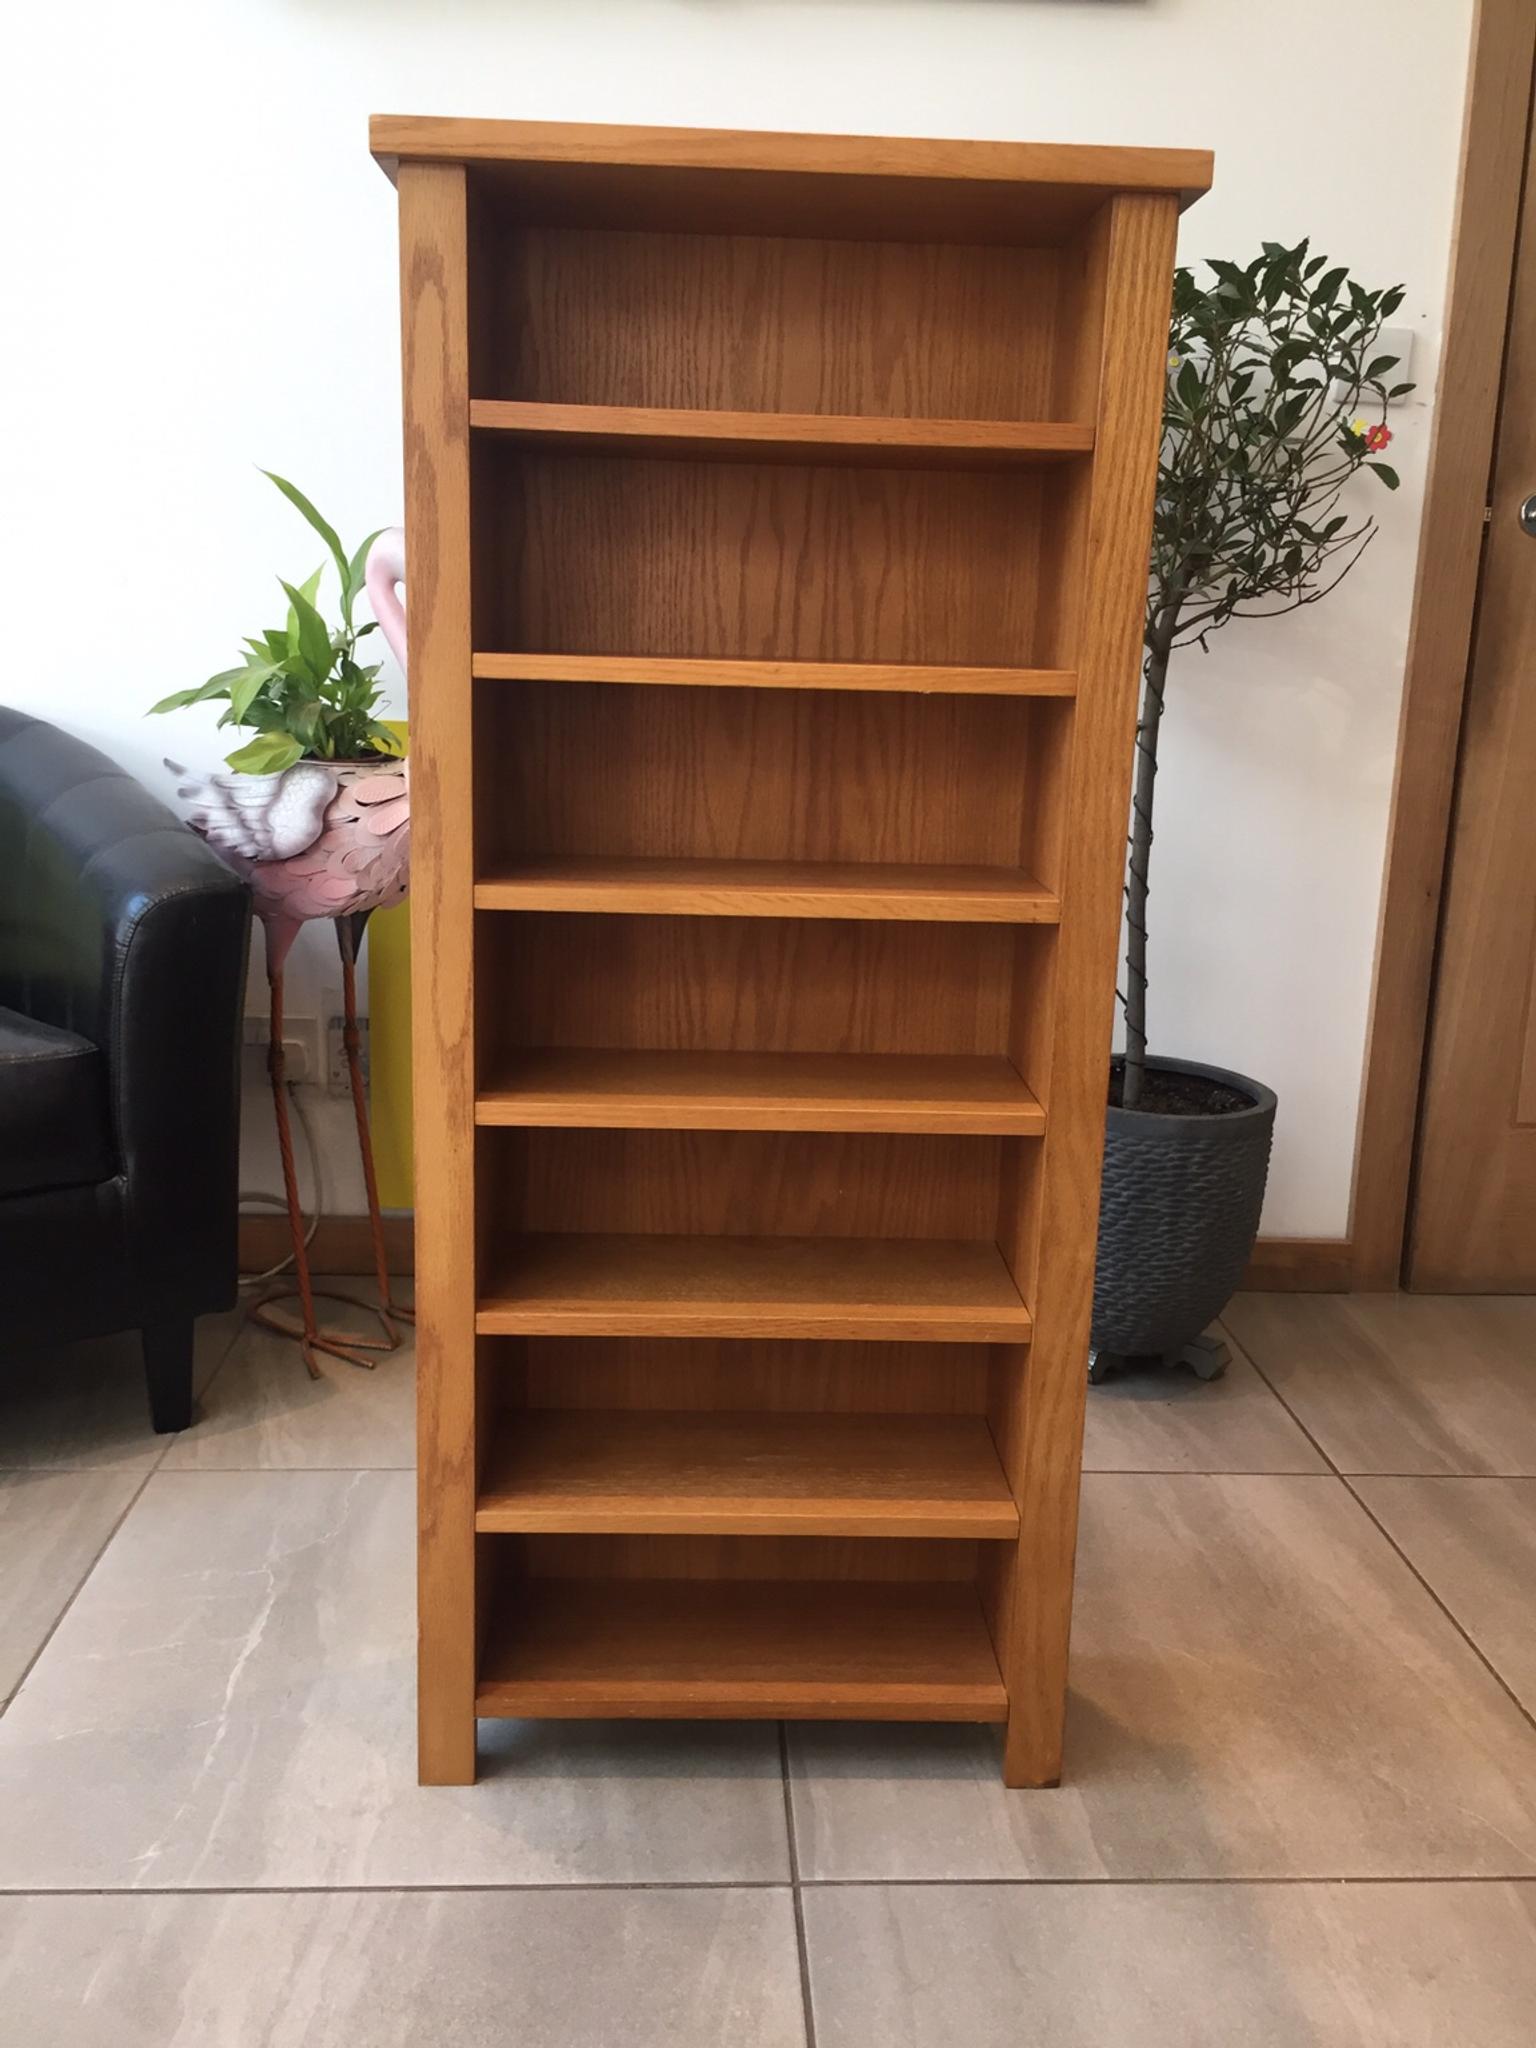 Lovely Solid Wood Bookcase Shelving Unit In Doncaster Fur 40 00